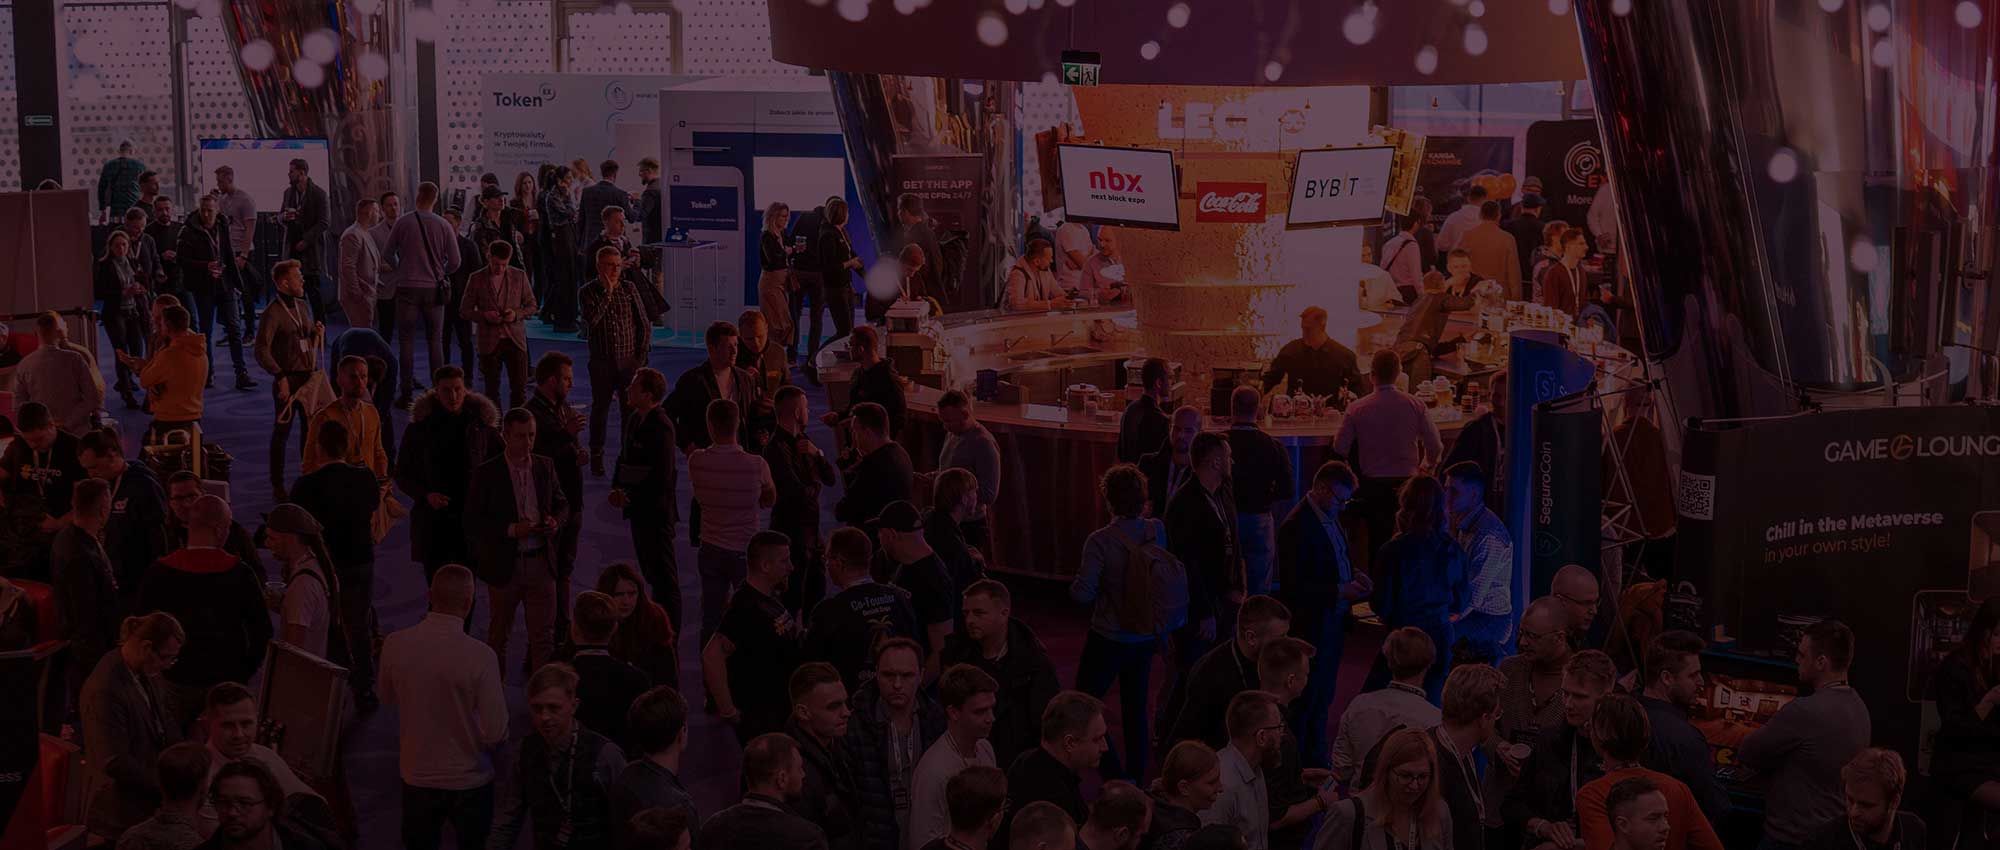 next block expo - Warsaw, 24-25 May 2023##The Blockchain Festival of Europe##5% discount in hotels bookings##promo code: nextblockexpo##Find hotels near venue##Pay with crypto